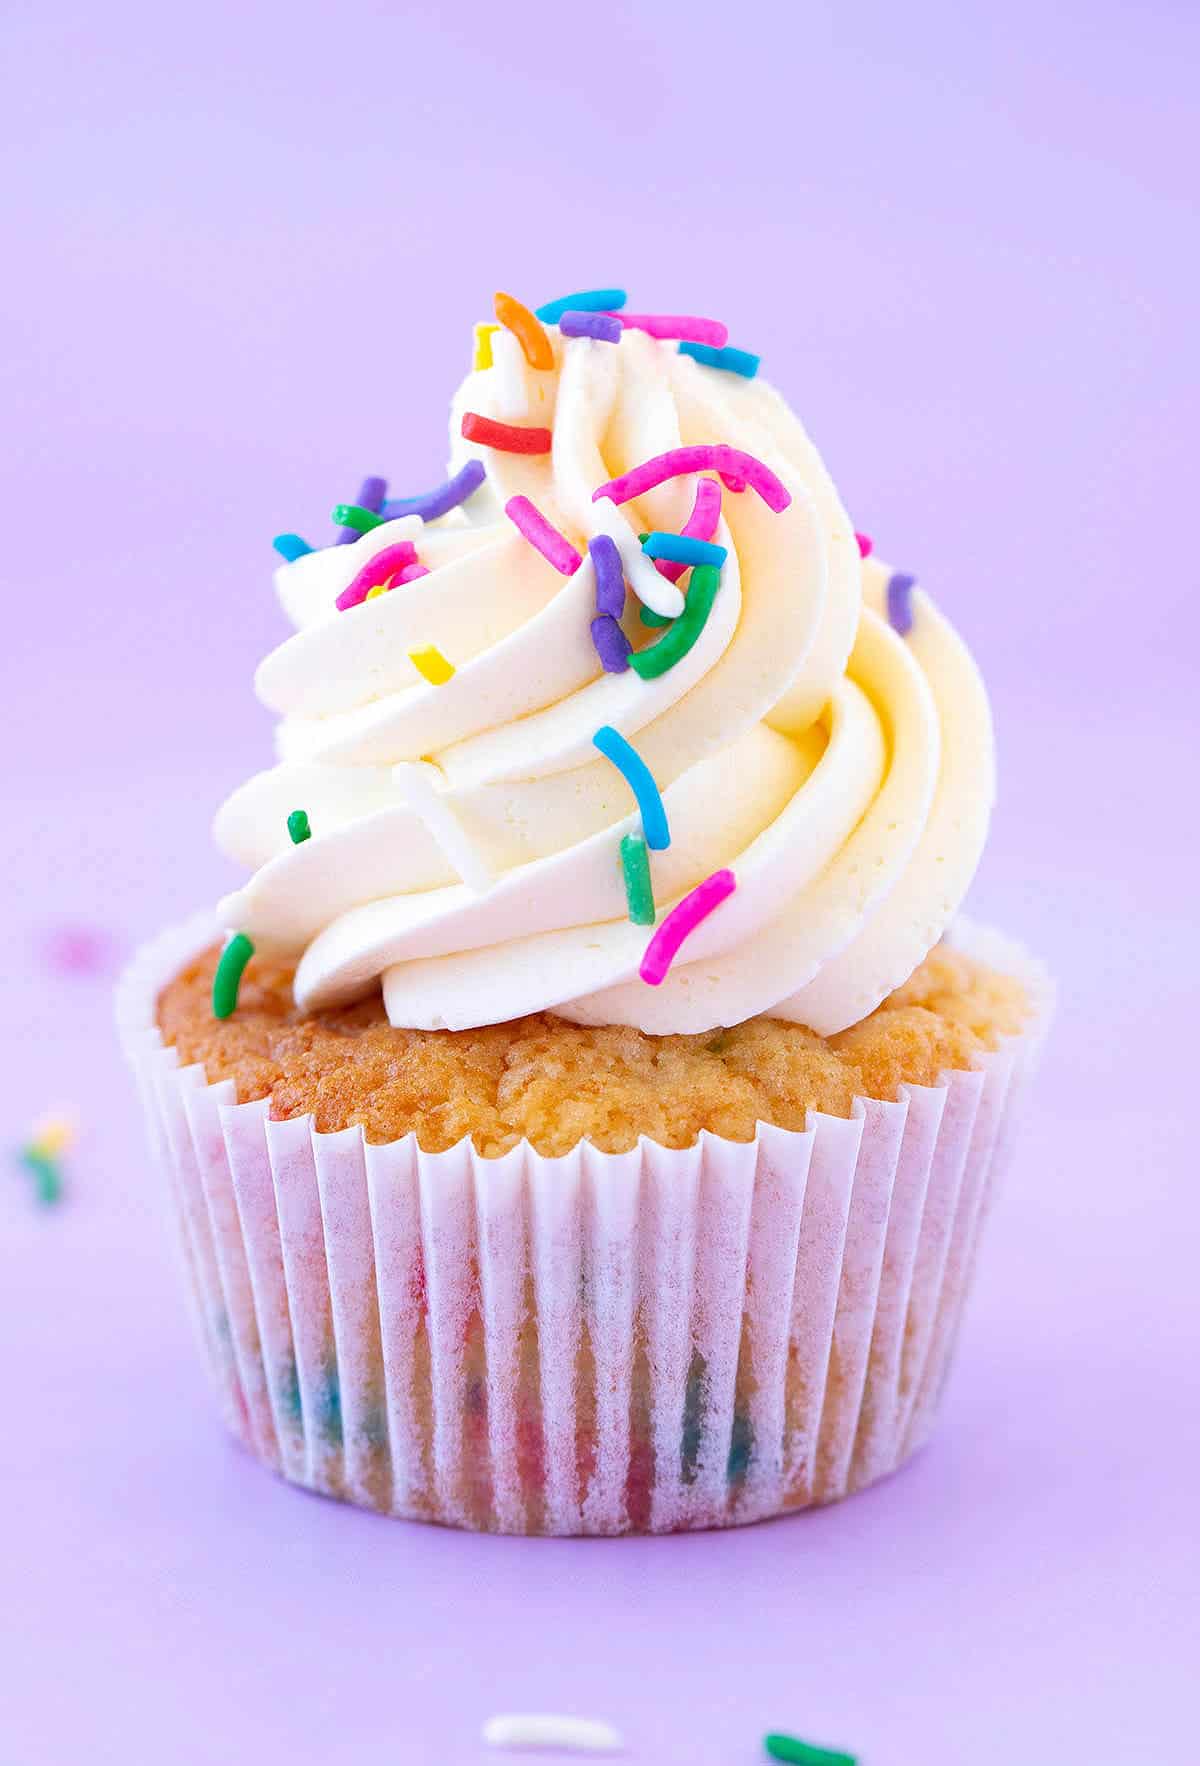 A beautiful cupcakes topped with swirls of frosting on a purple background.